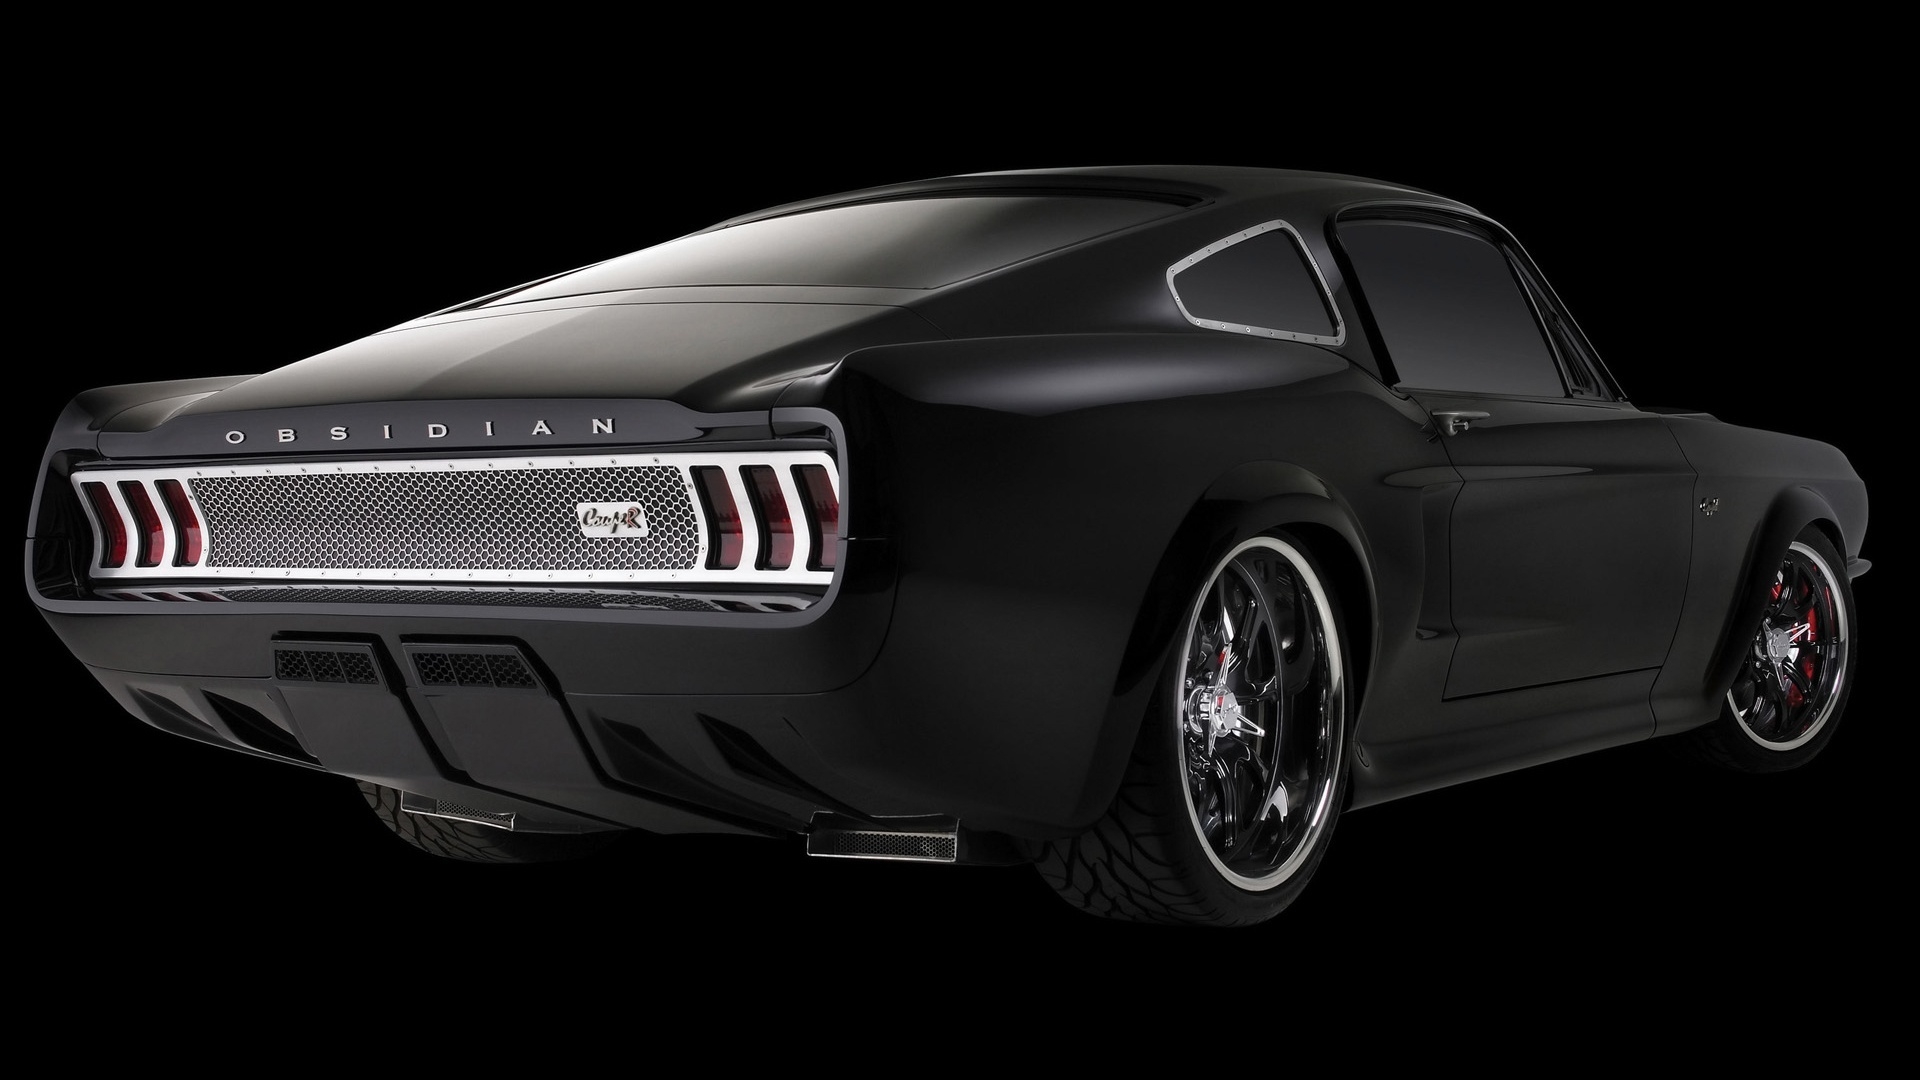 Obsidian SG One Ford-Mustang for 1920 x 1080 HDTV 1080p resolution